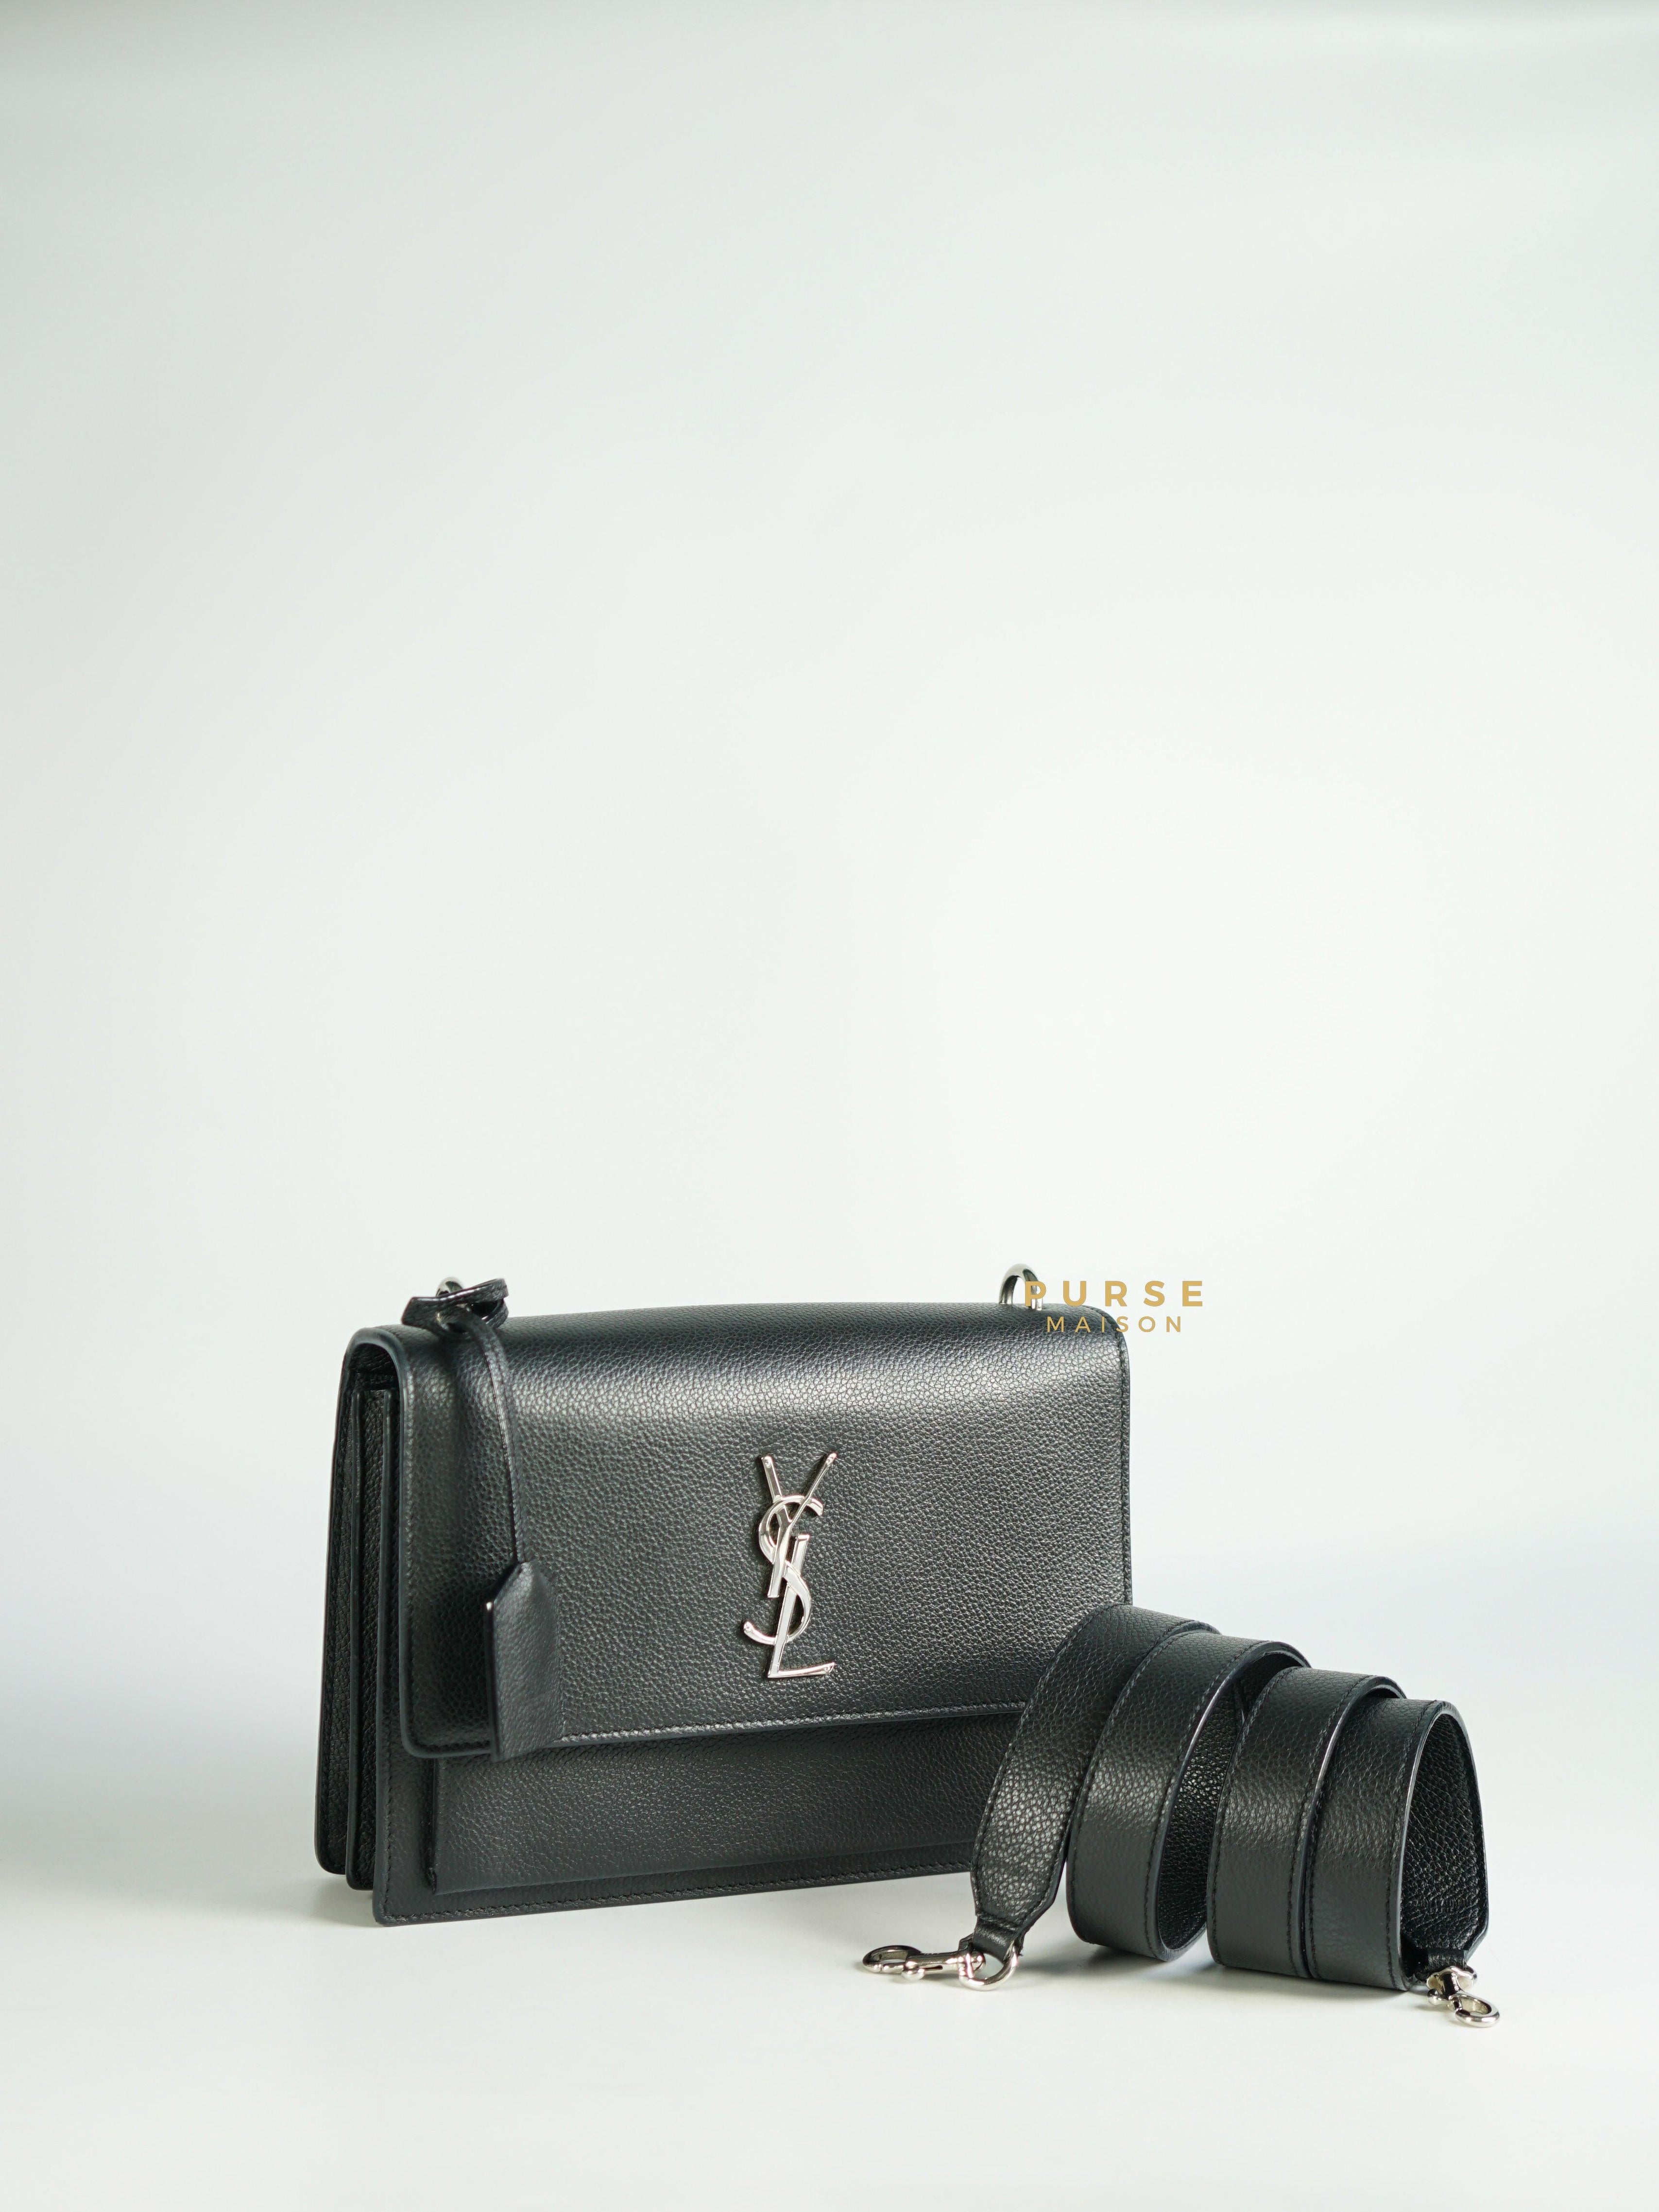 YSL Sunset Black Grained calfskin Leather in Silver Hardware | Purse Maison Luxury Bags Shop